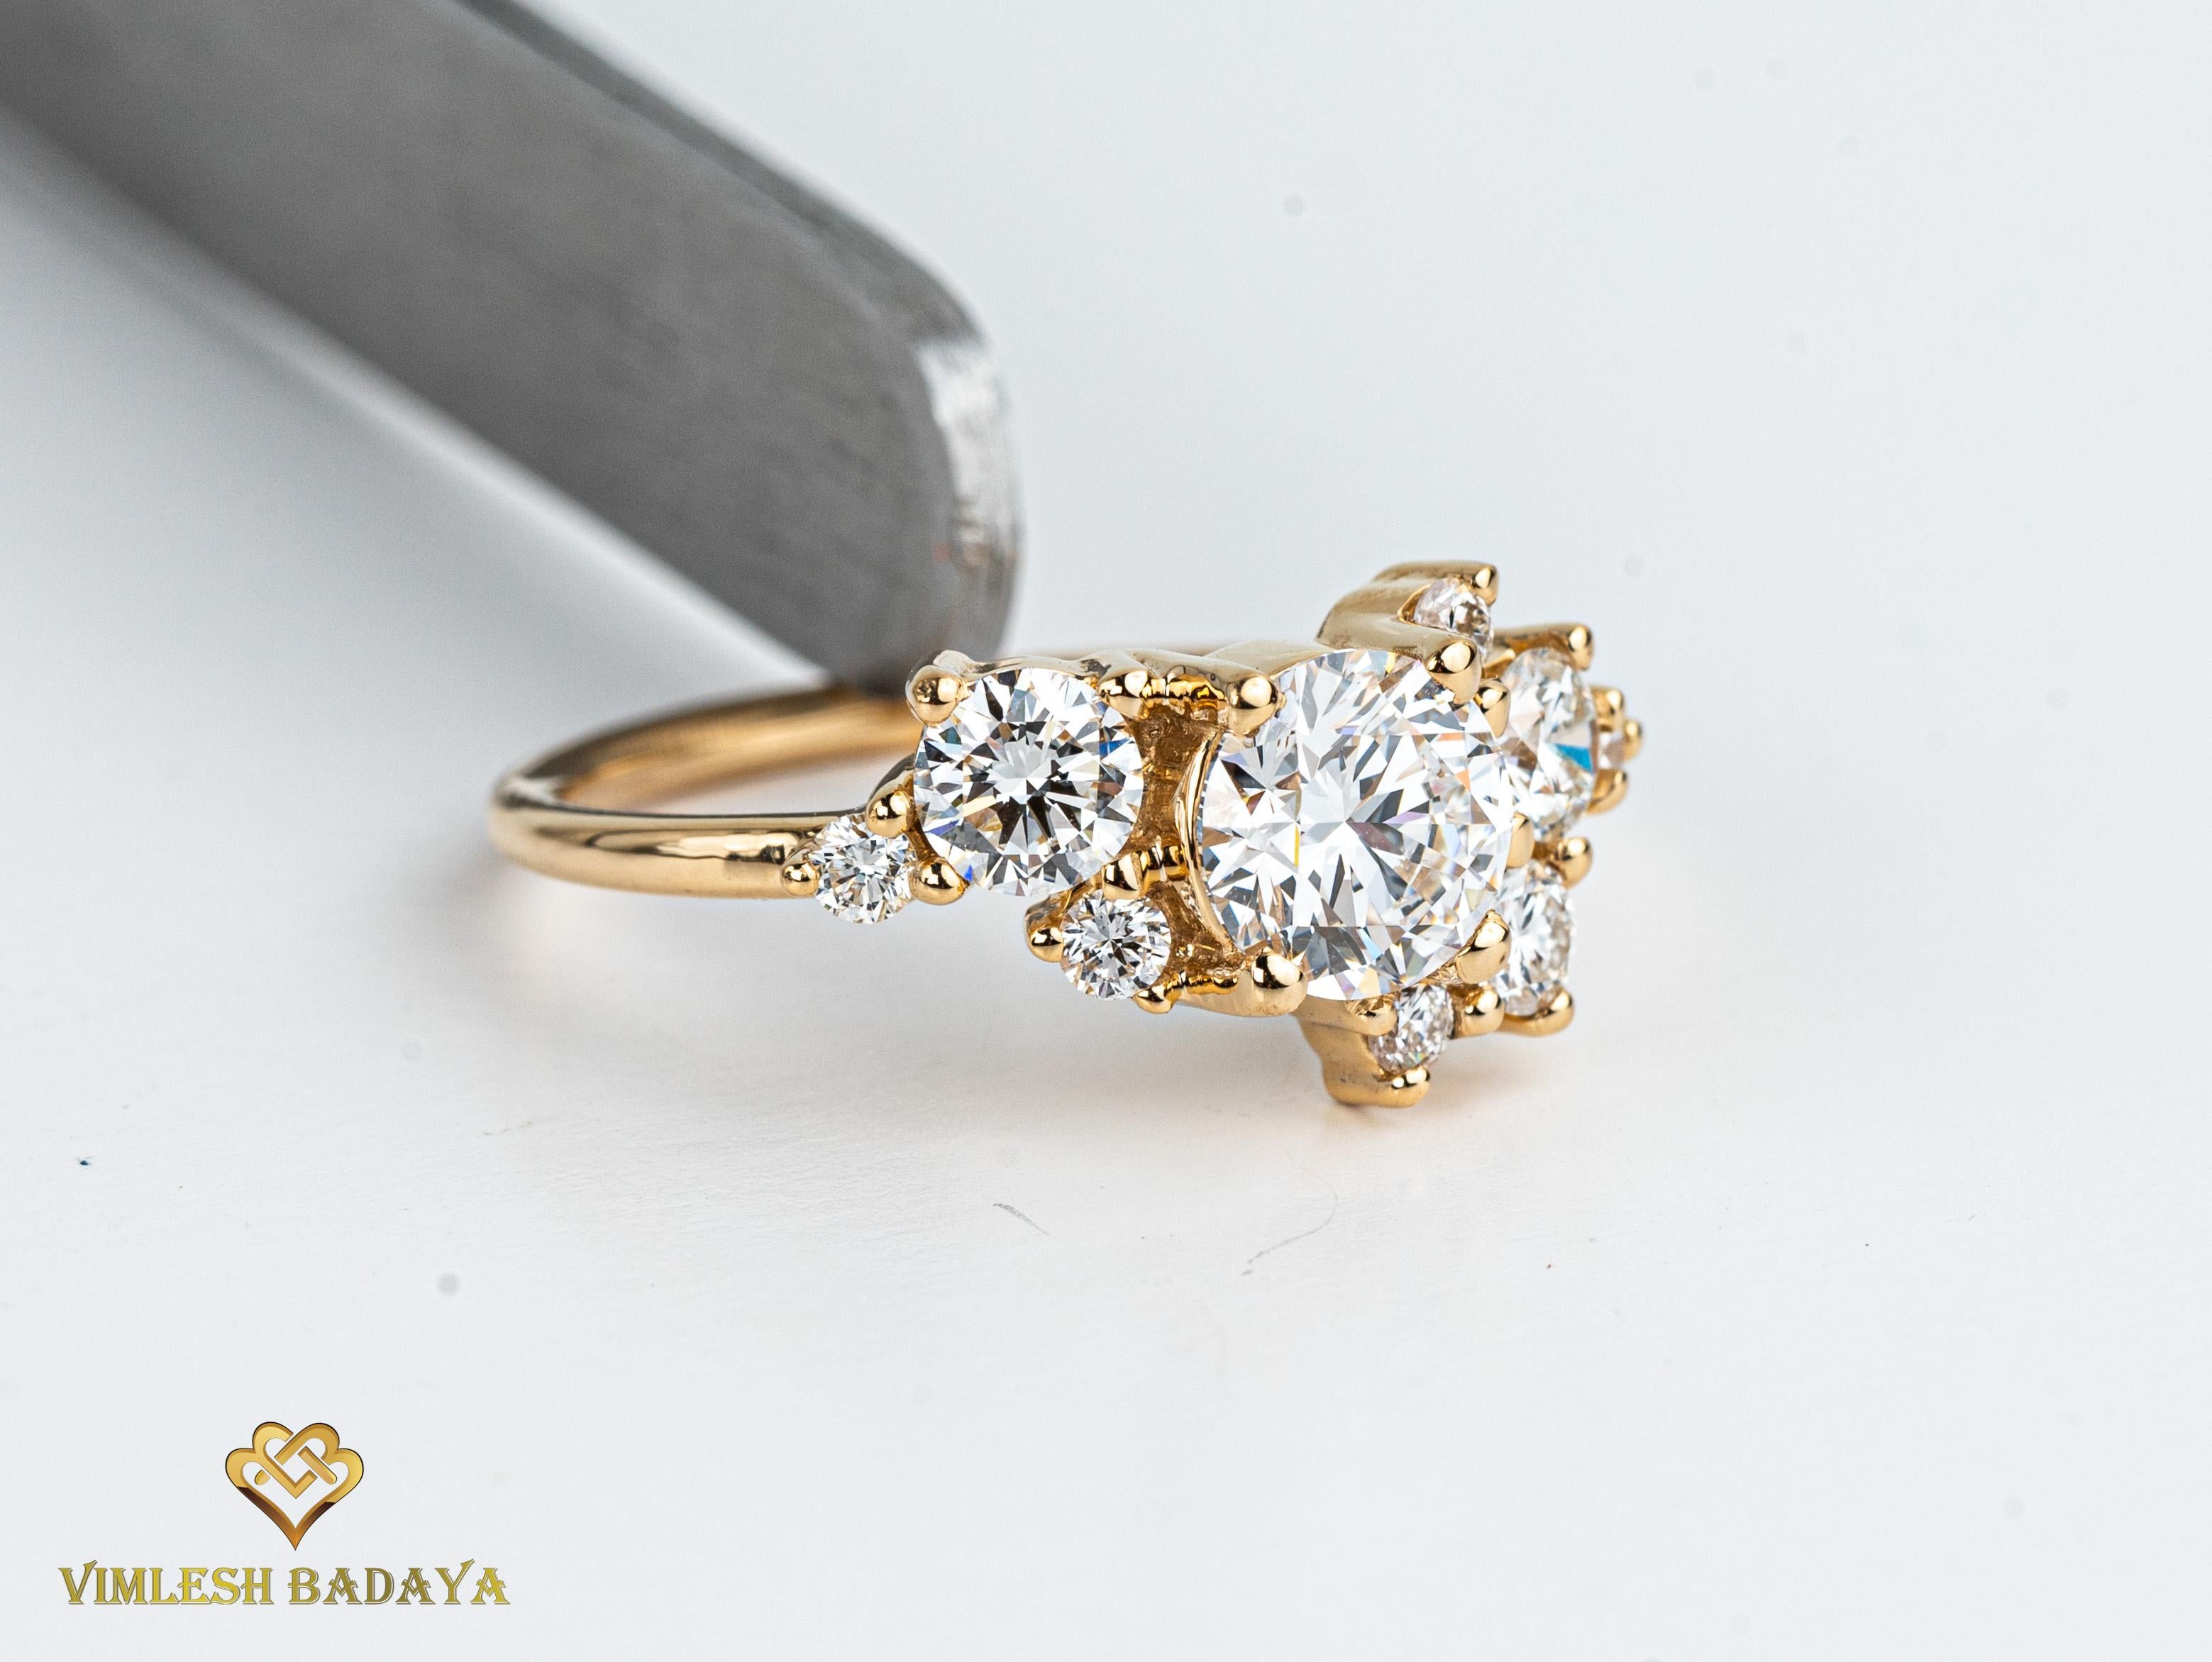 GIA Report Certified Diamond Cluster Ring, Round Cut Engagement Ring, 1.4 Carat Certified Diamond

Available in 18k gold.

Same design can be made also with other custom gemstones per request.

Product details:

- Solid gold

- 1 carat and 4mm Lab